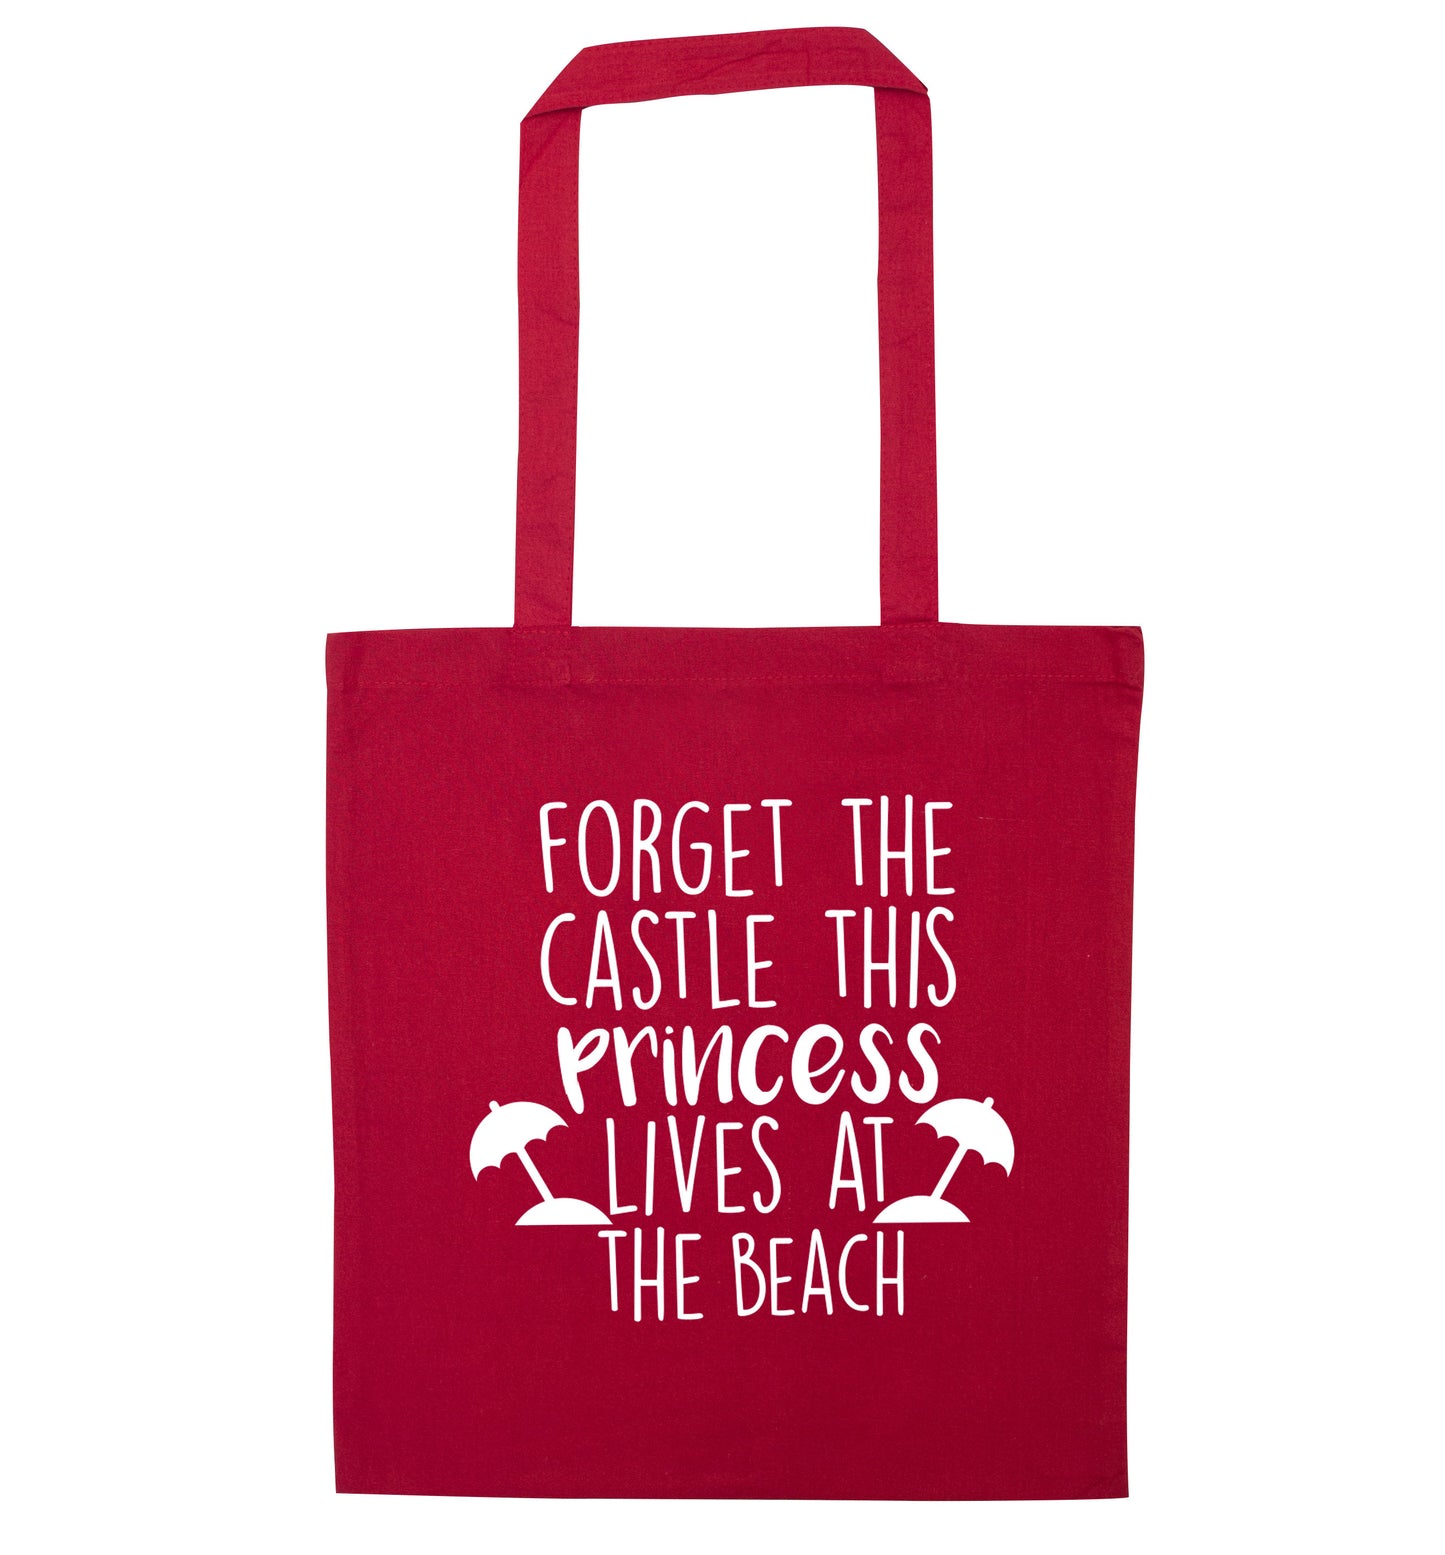 Forget the castle this princess lives at the beach red tote bag